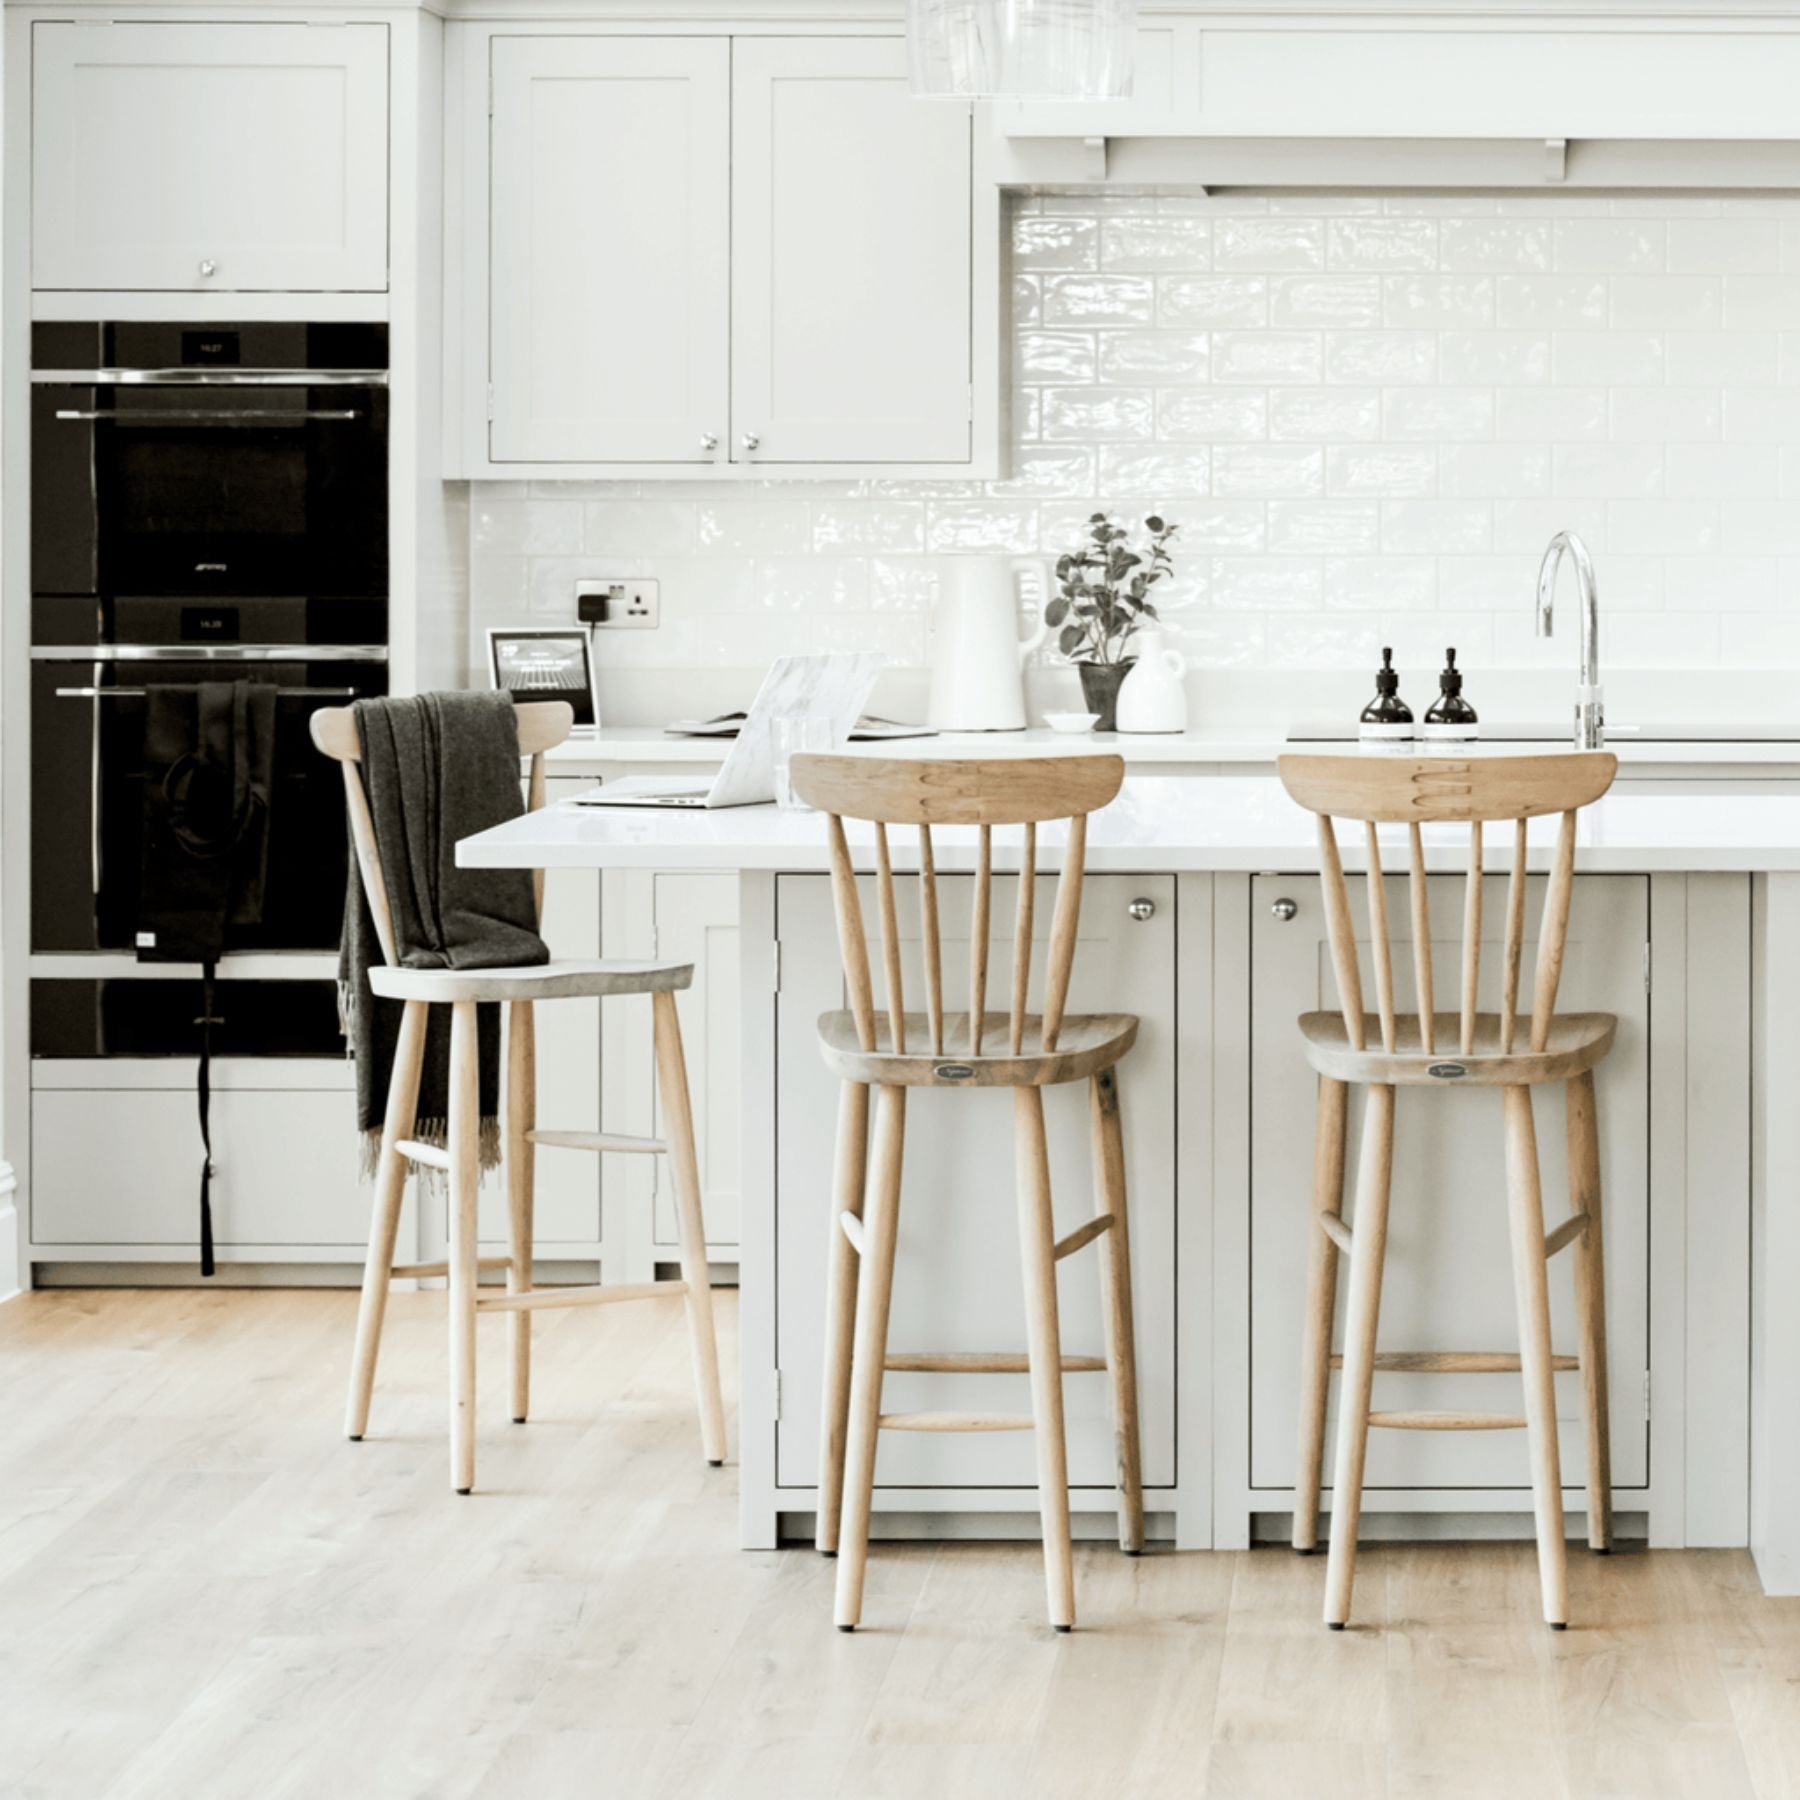 bar stools enhance the completeness of the kitchen island in the house